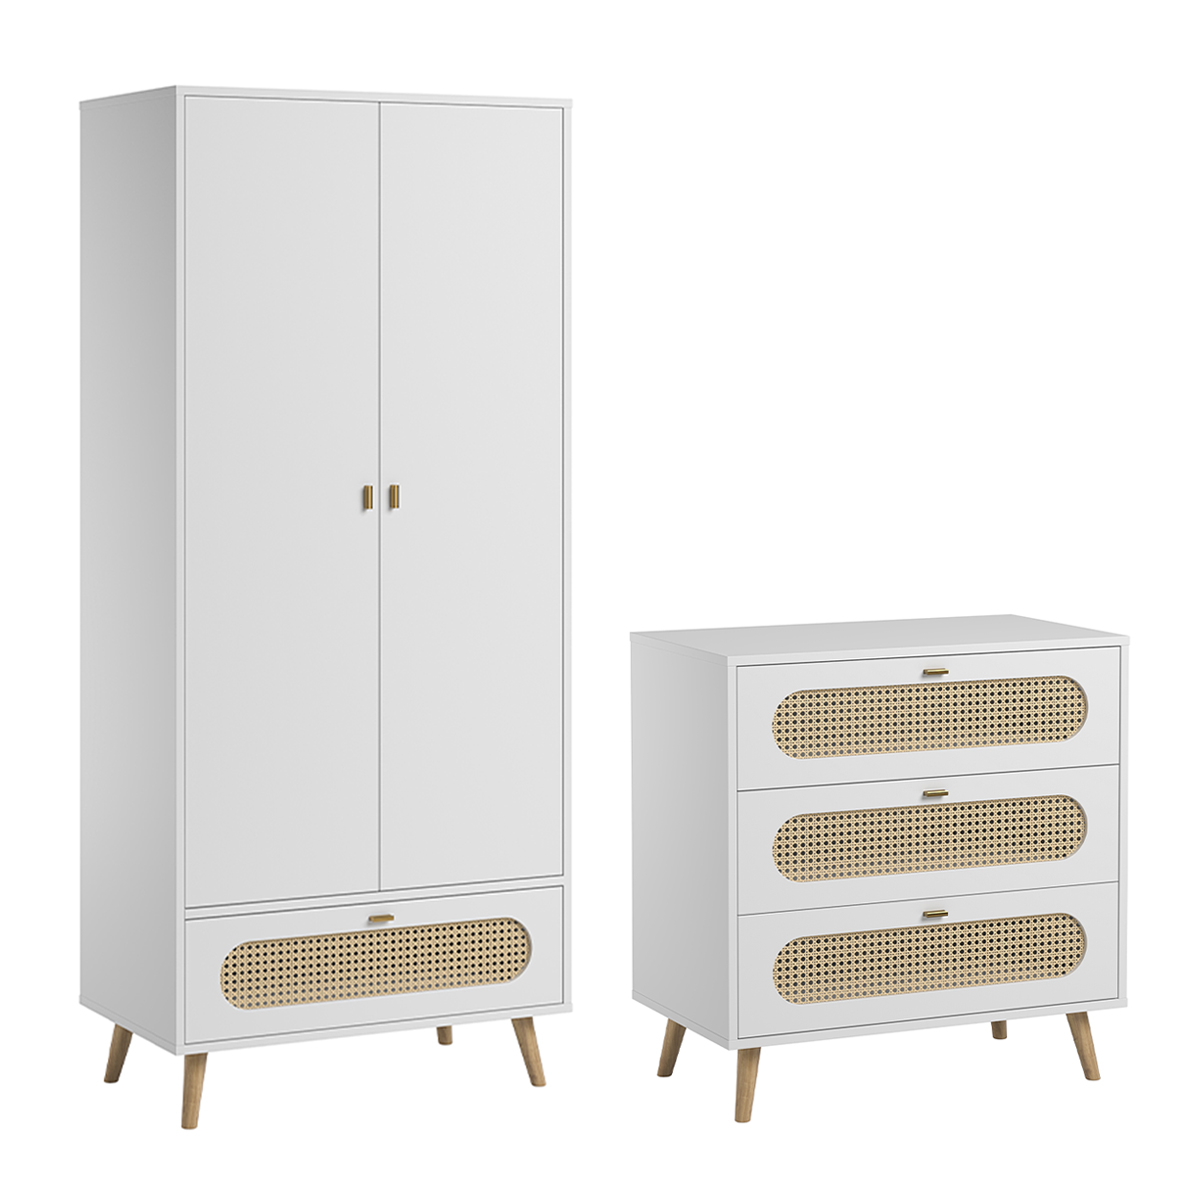 6050124_6050123_vox_canne_chambre_bebe_armoire_commode_1